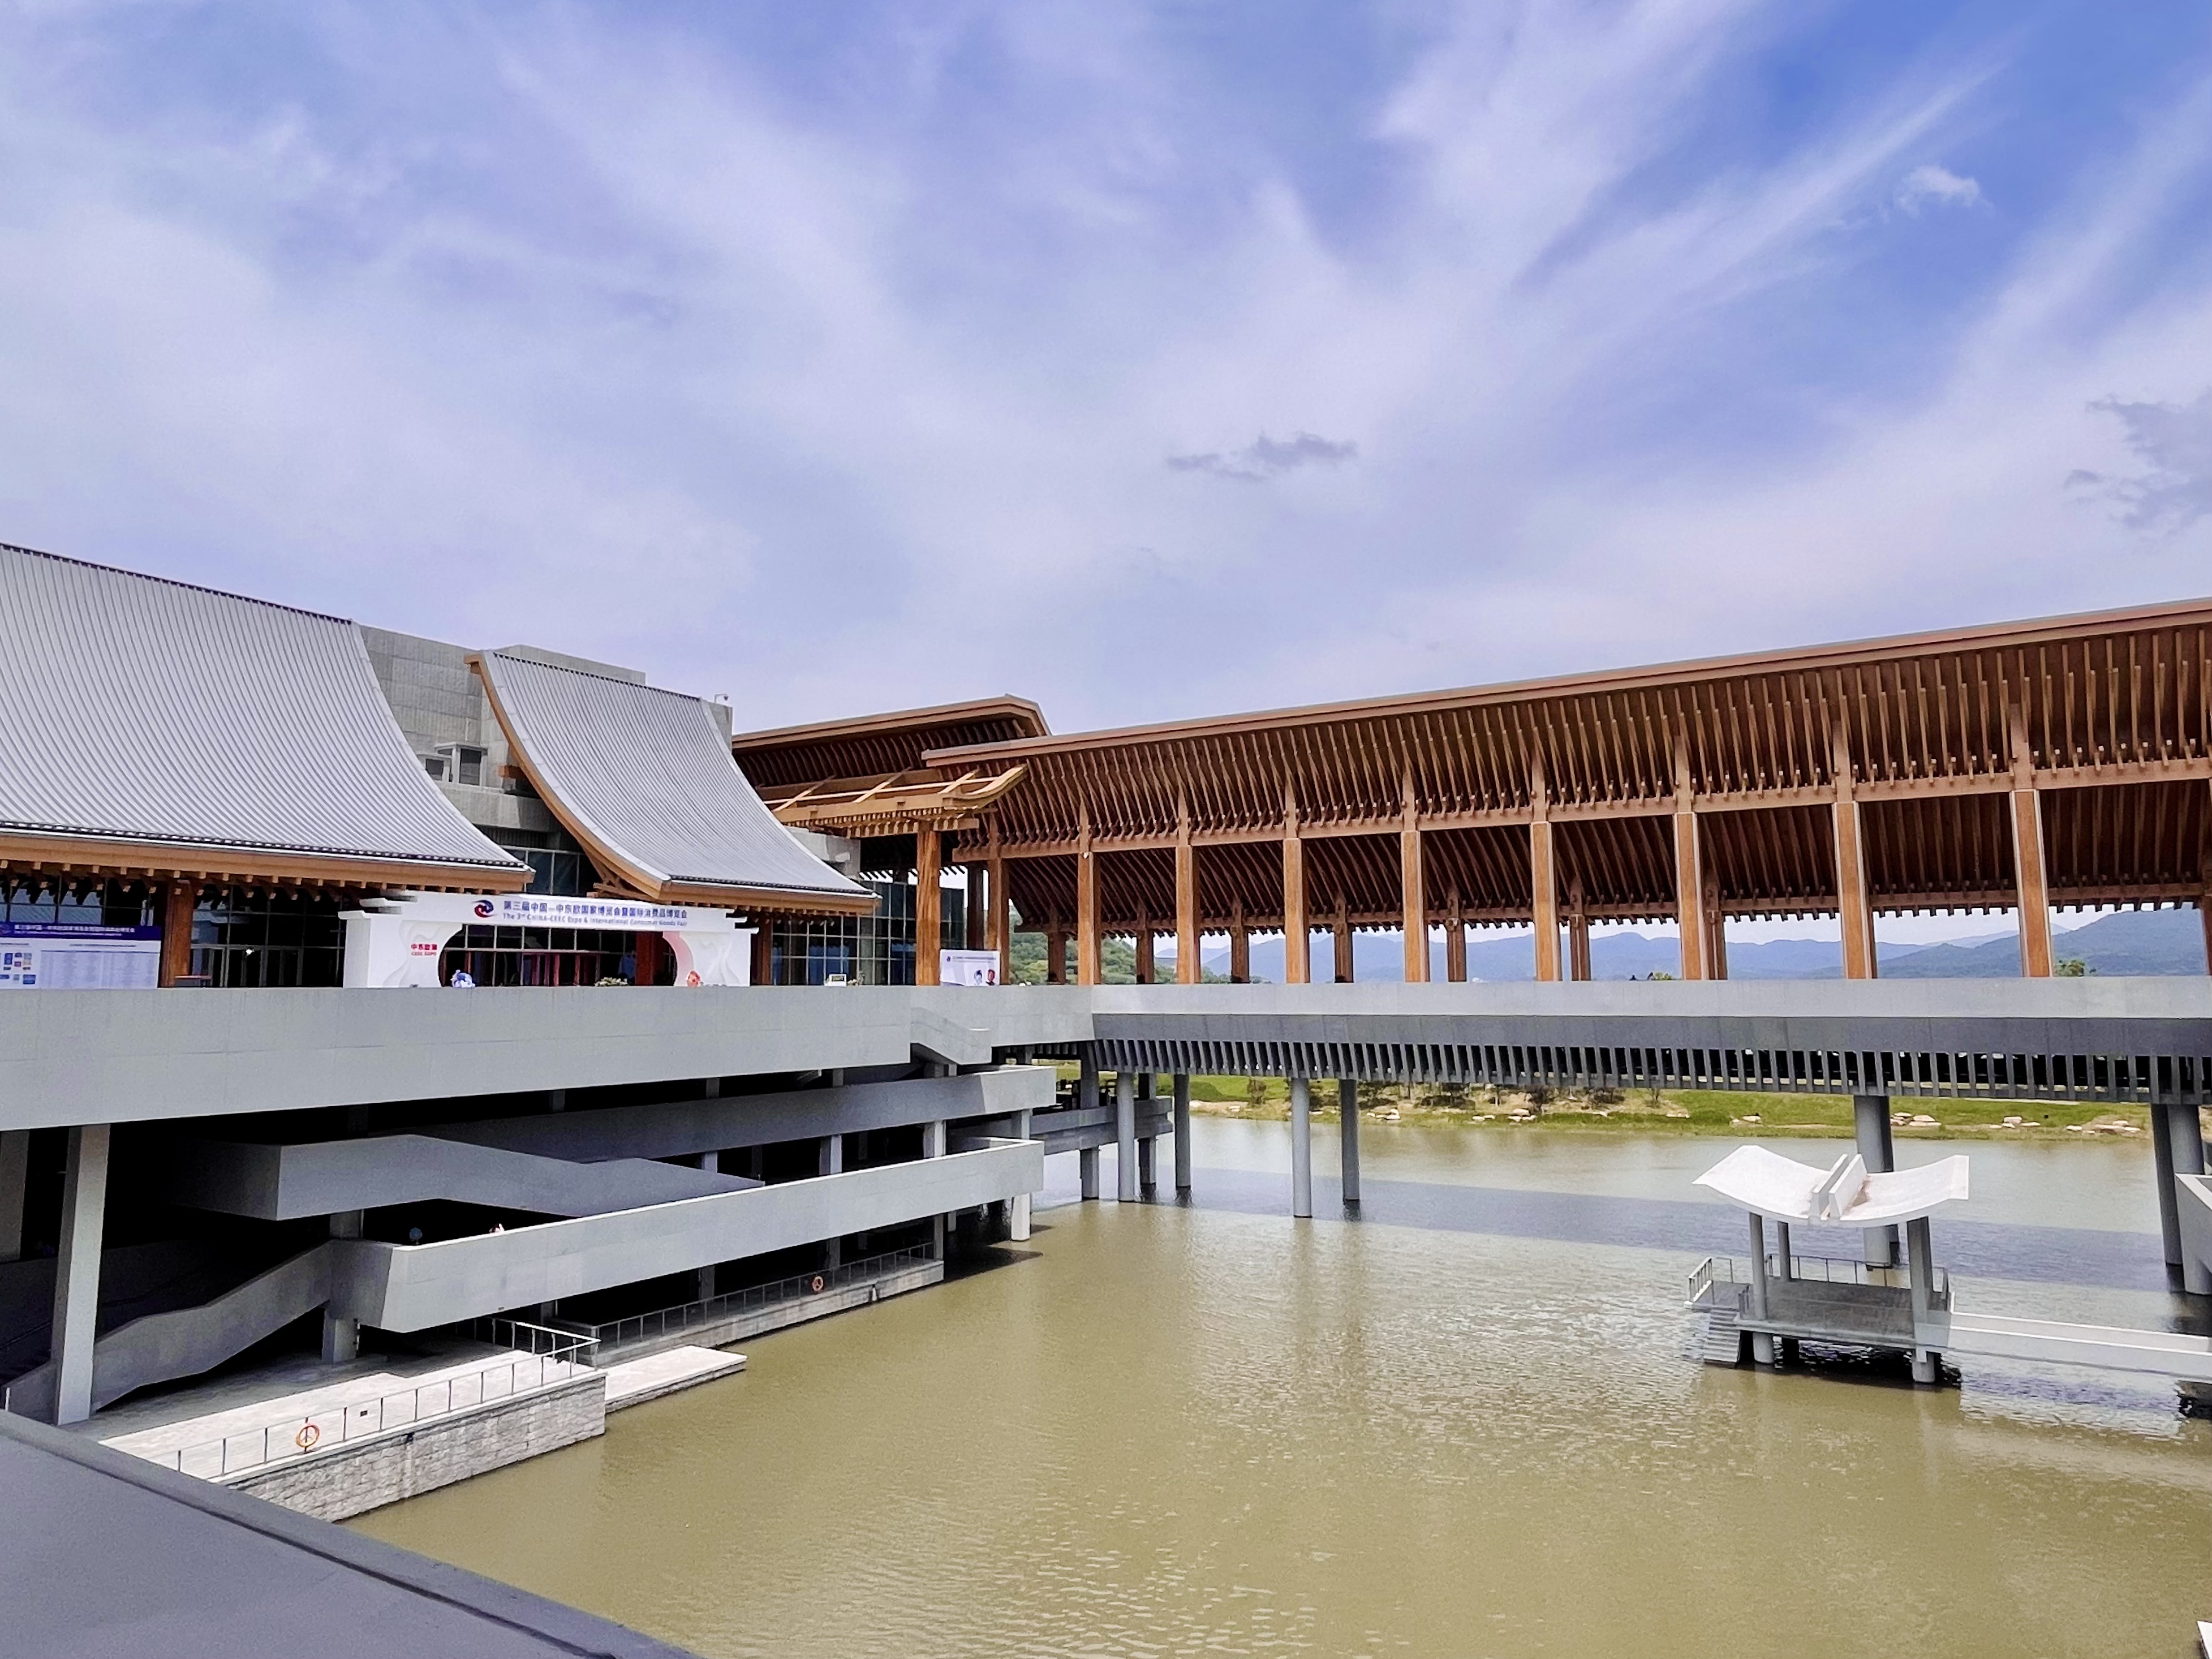 In pictures: Ningbo International Convention Center 